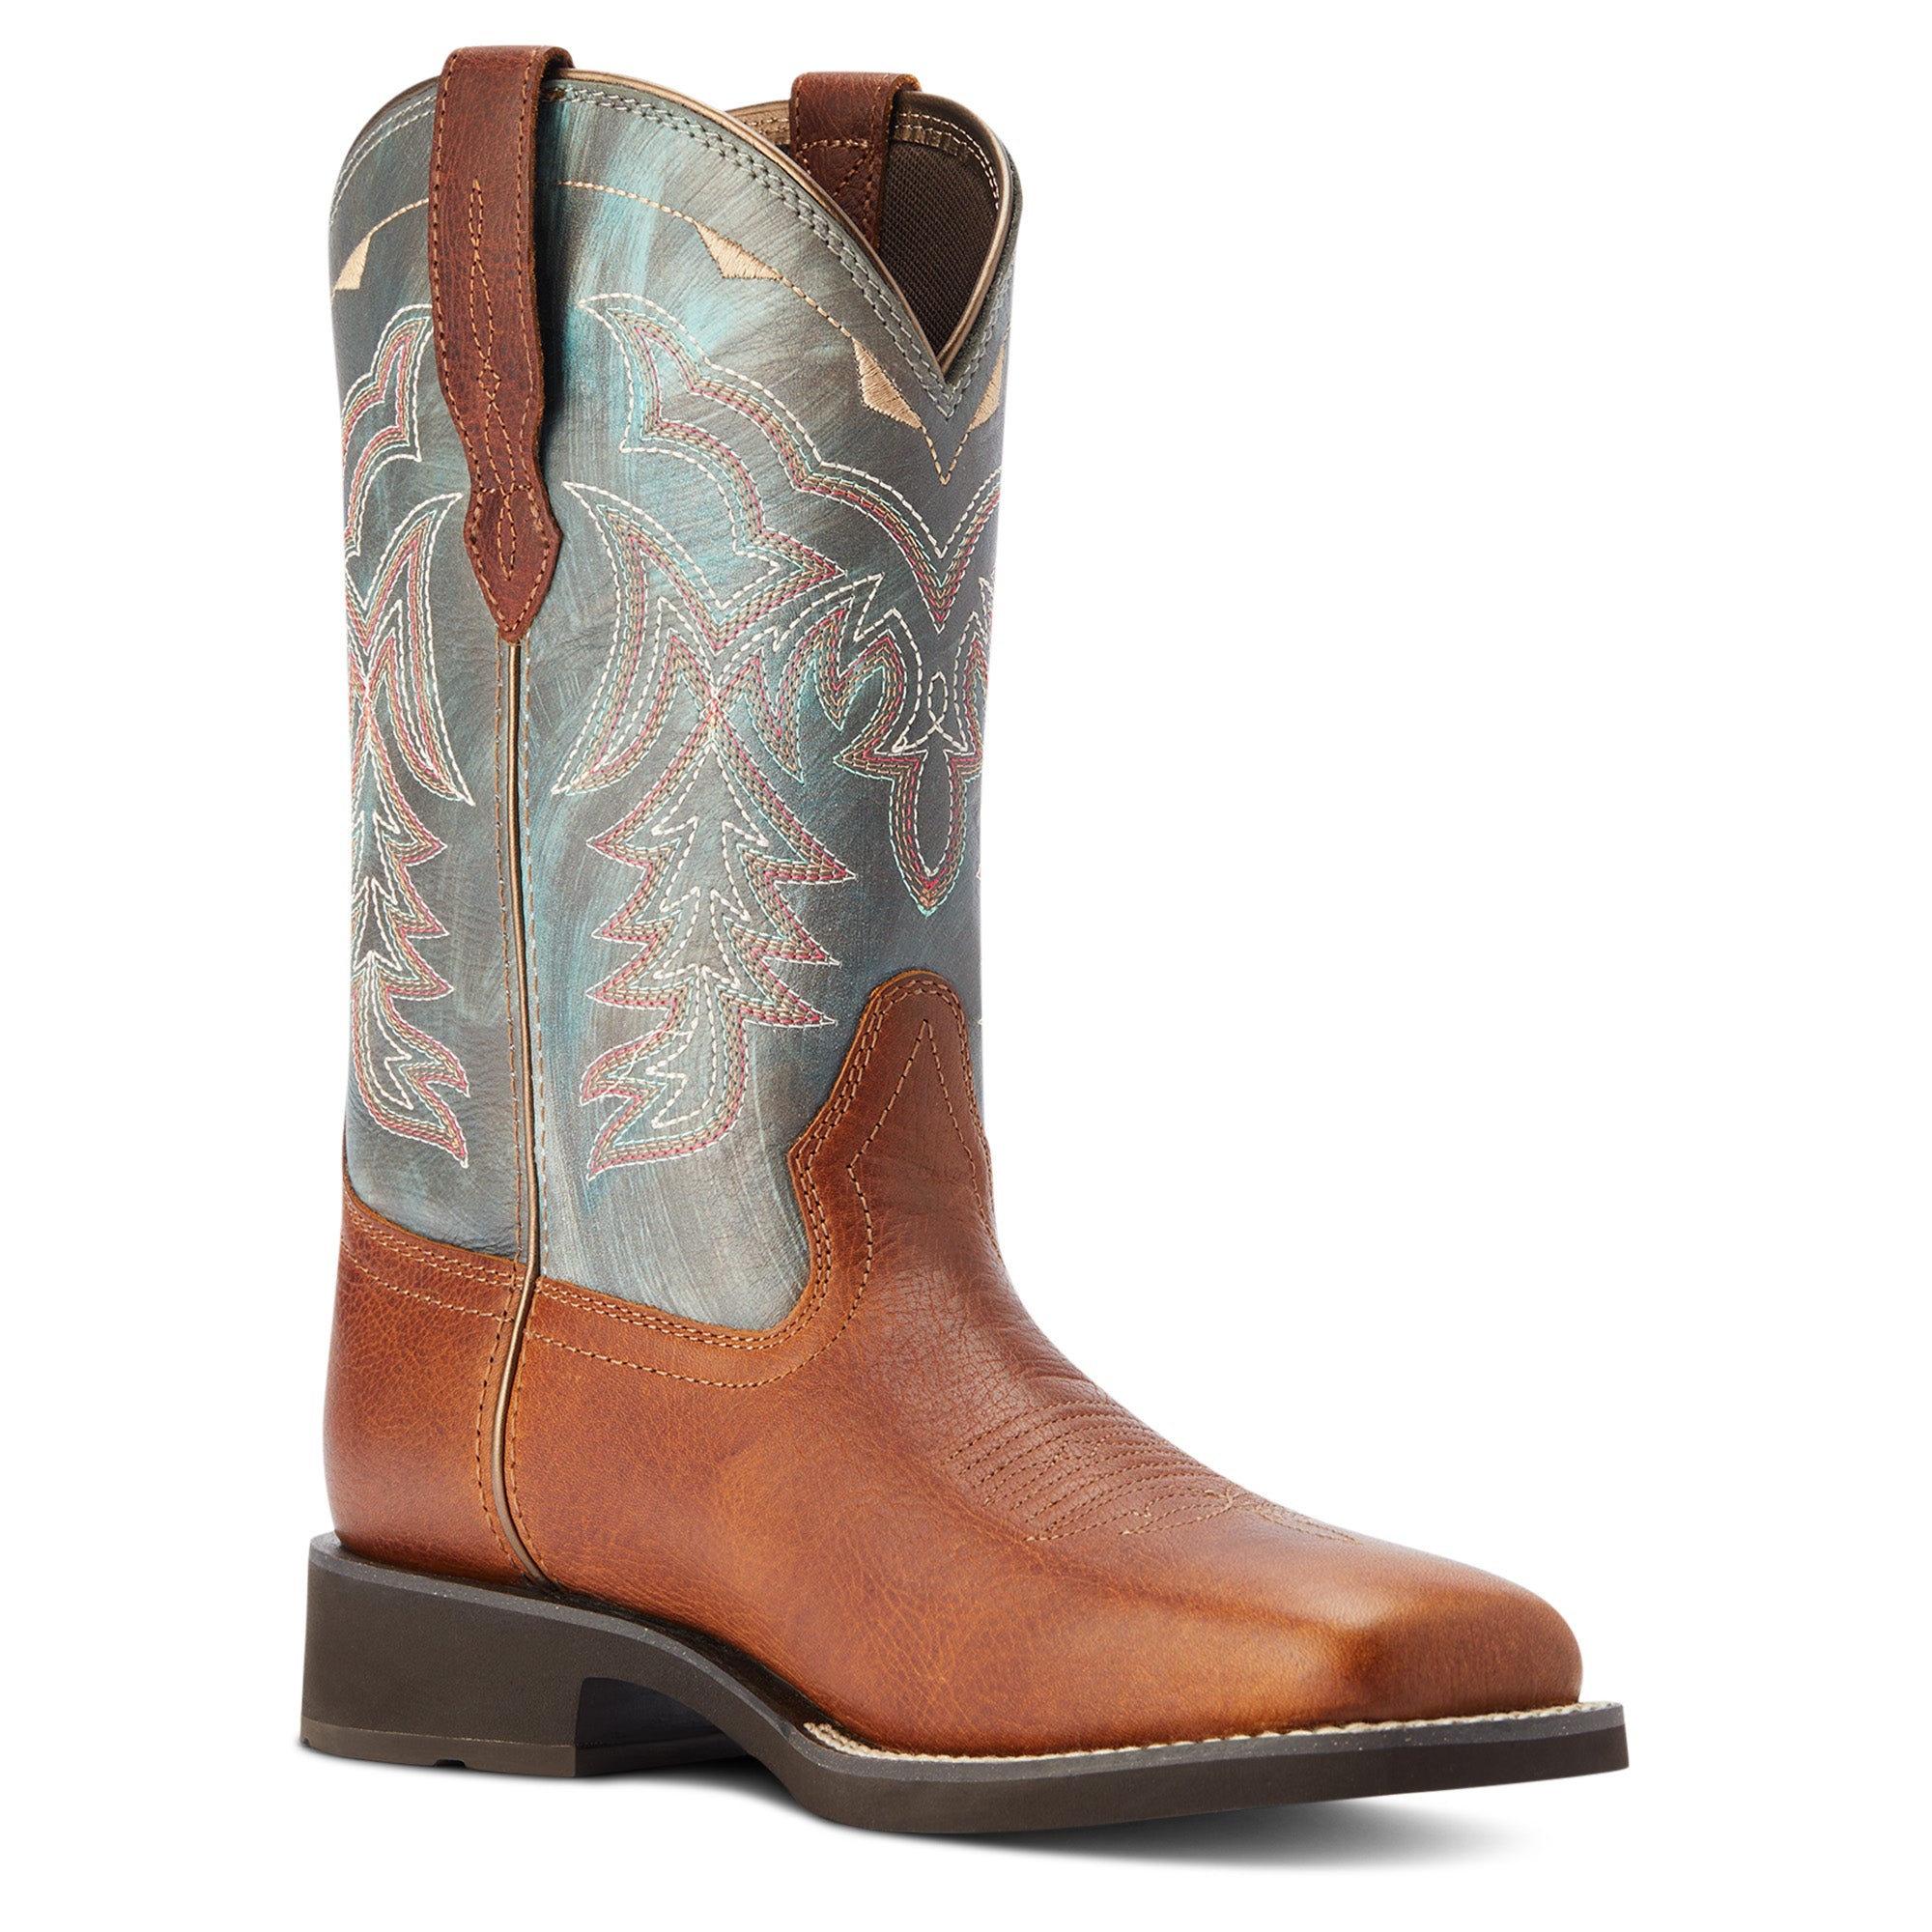 Ariat Delilah Square Toe Cowgirl Boot